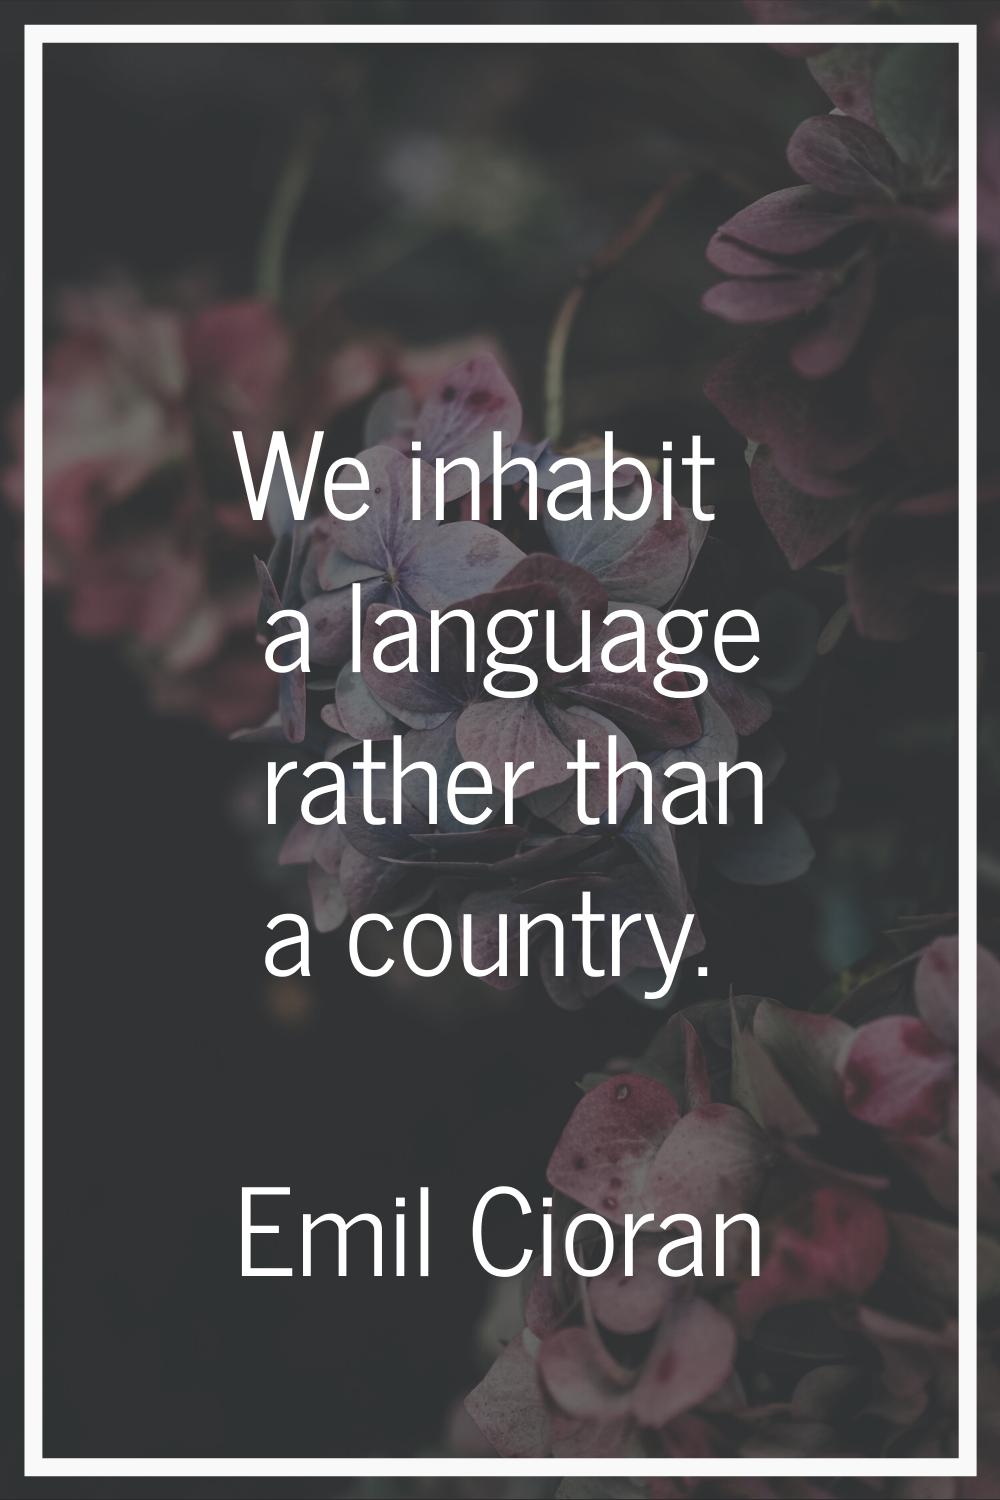 We inhabit a language rather than a country.